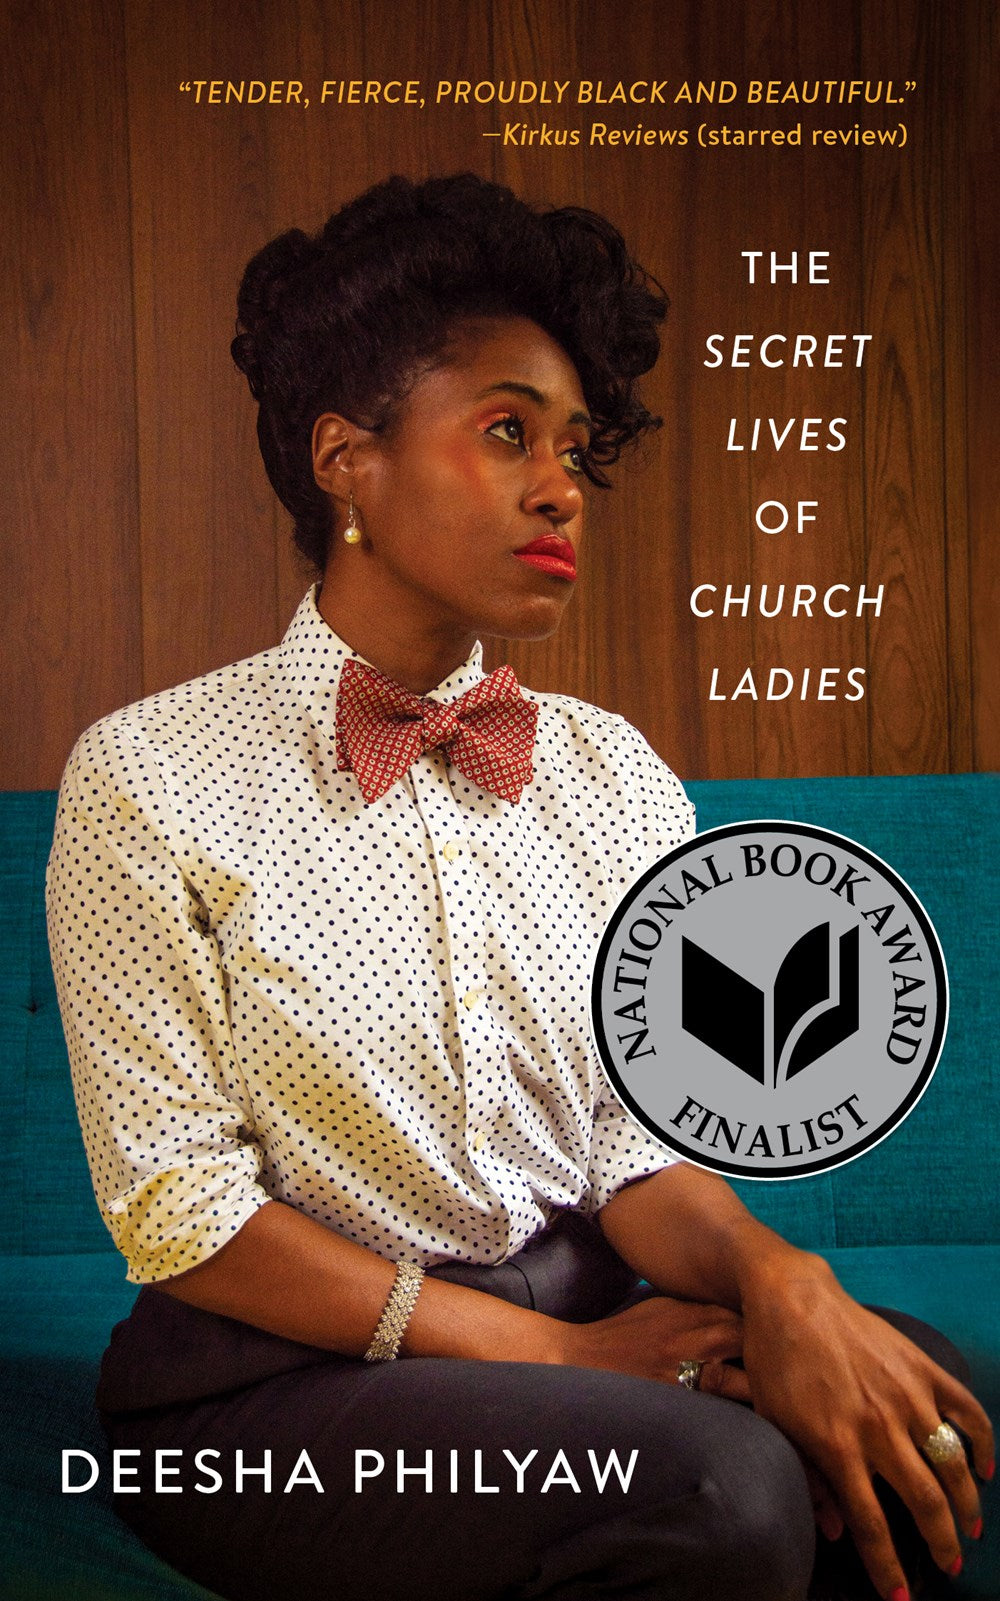 The Secret Lives of Church Ladies: Stories by Deesha Philyaw